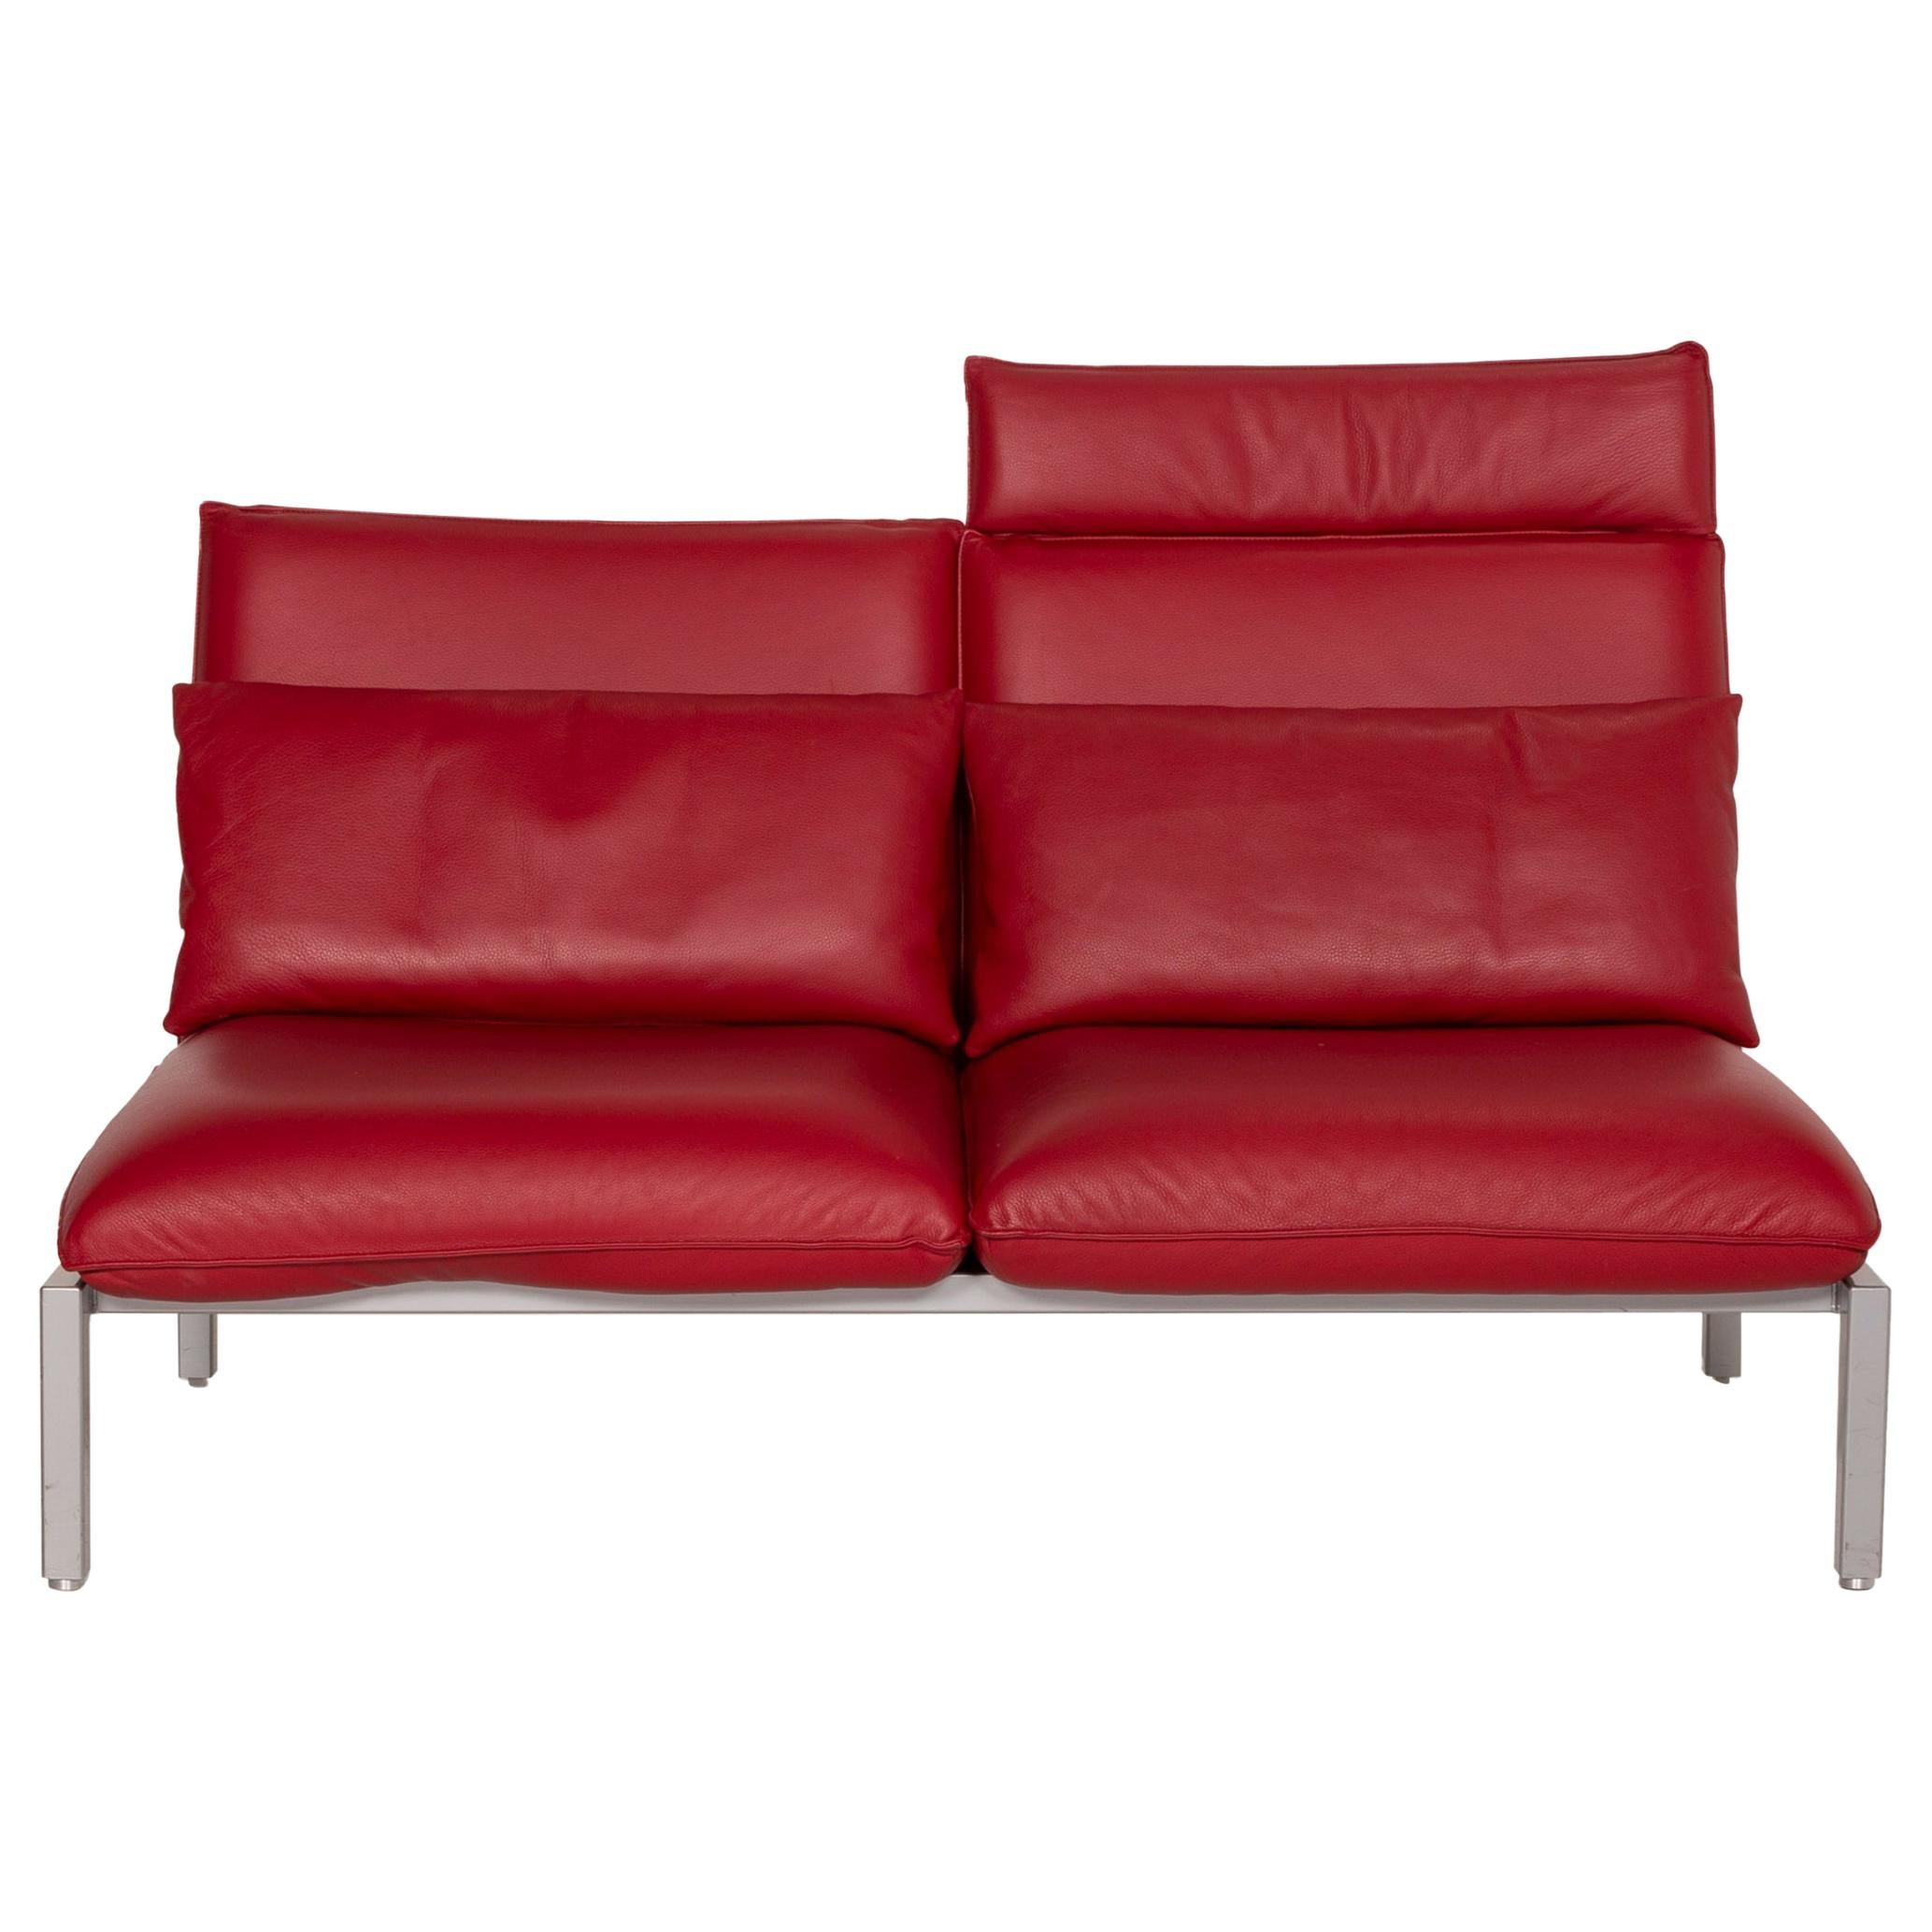 Brühl & Sippold Roro Leather Sofa Two-Seater Reclining Function Relaxation